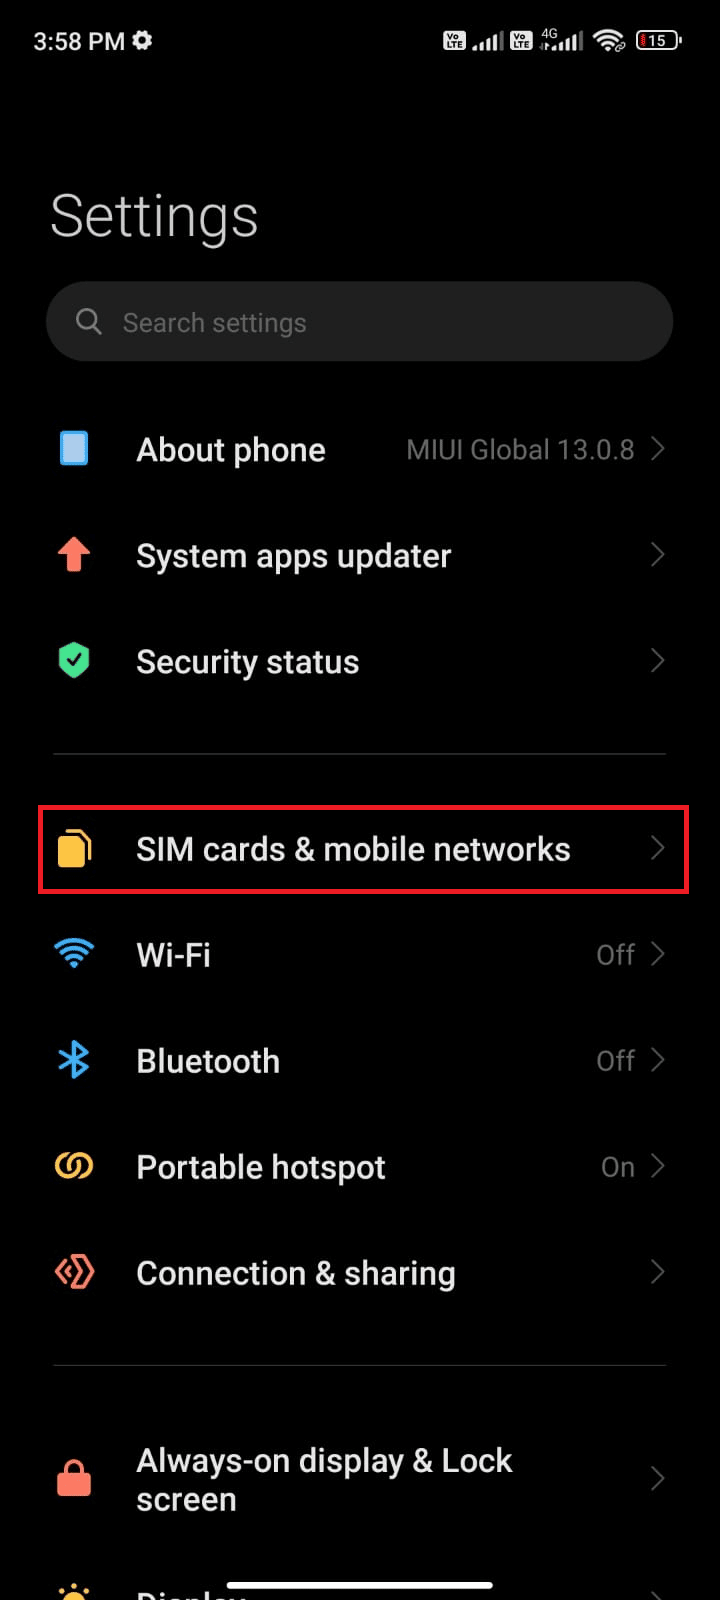 Then, tap the SIM cards mobile networks option . 